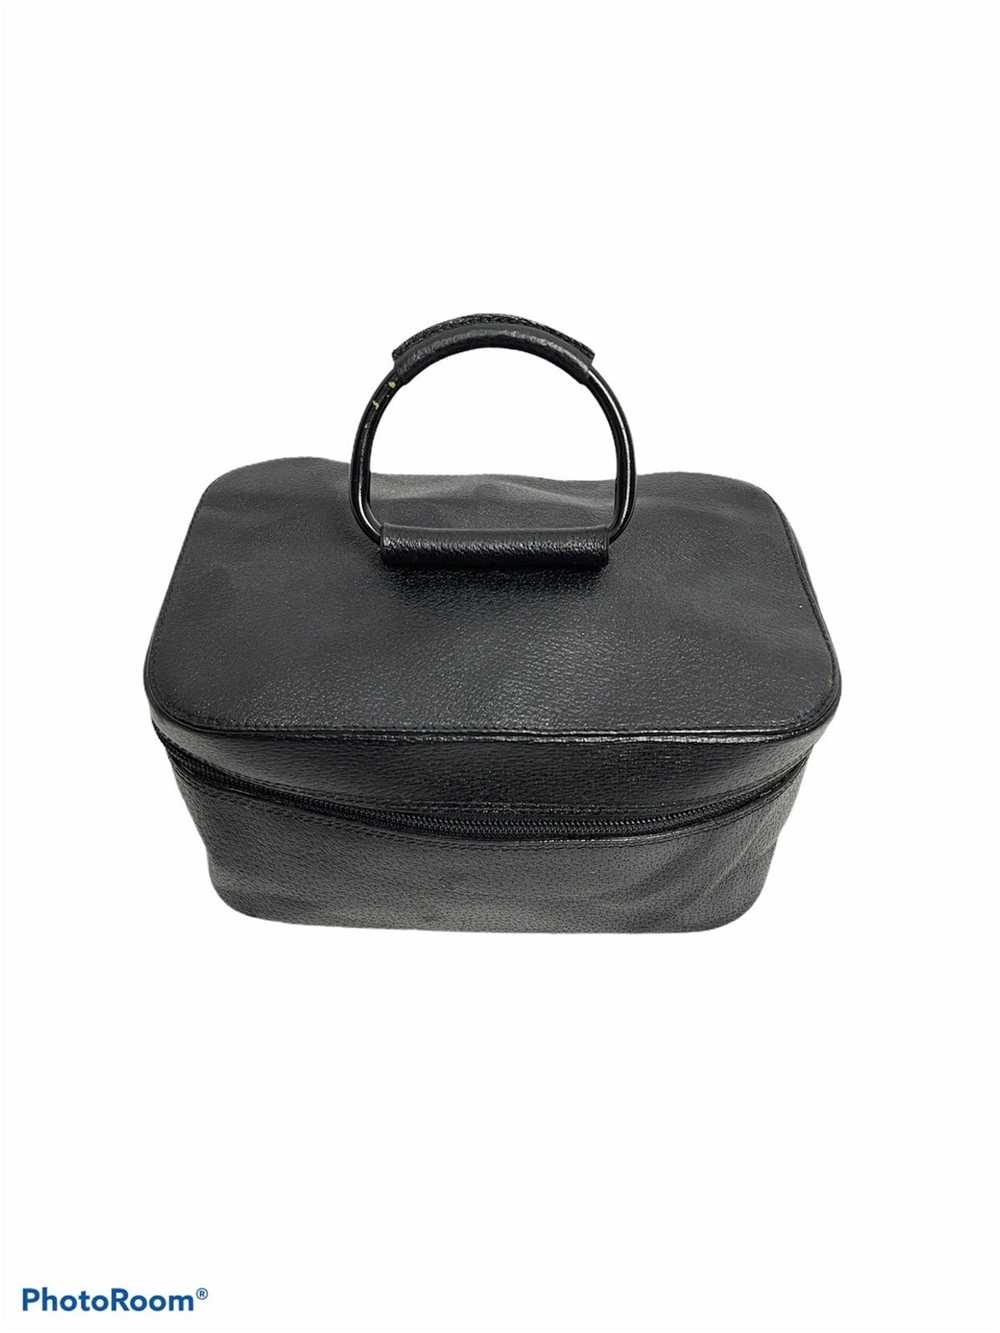 Gucci Authentic Vintage Gucci Black Cosmetic Bag - image 2